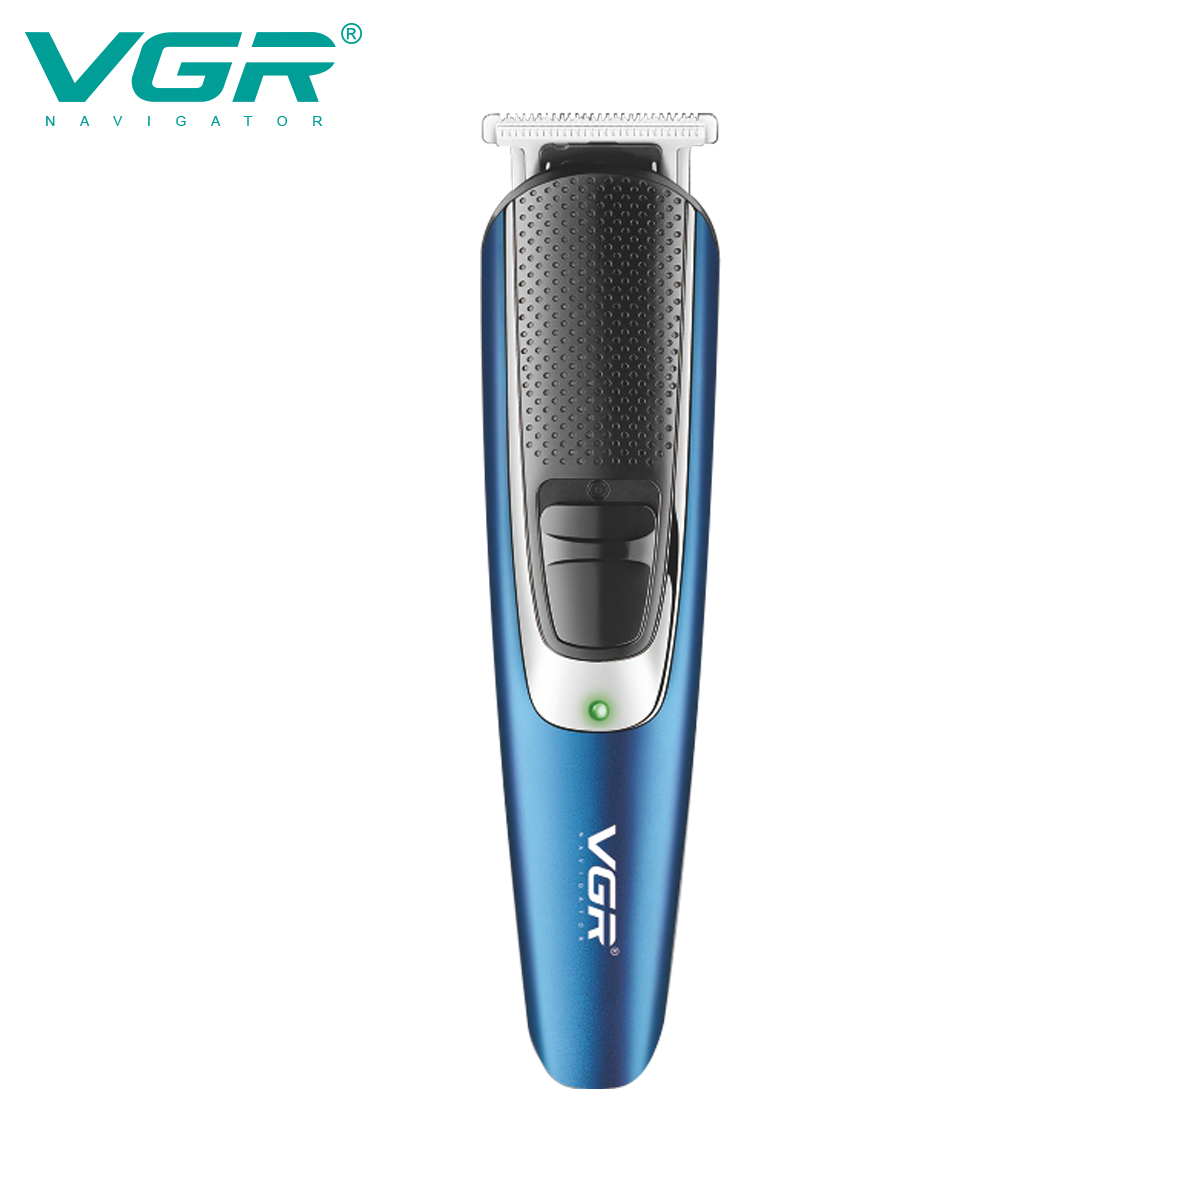 VGR V-172 5 in 1 mens grooming kit professional electric shaver beard and nose hair trimmer cordless barber hair clipper set1